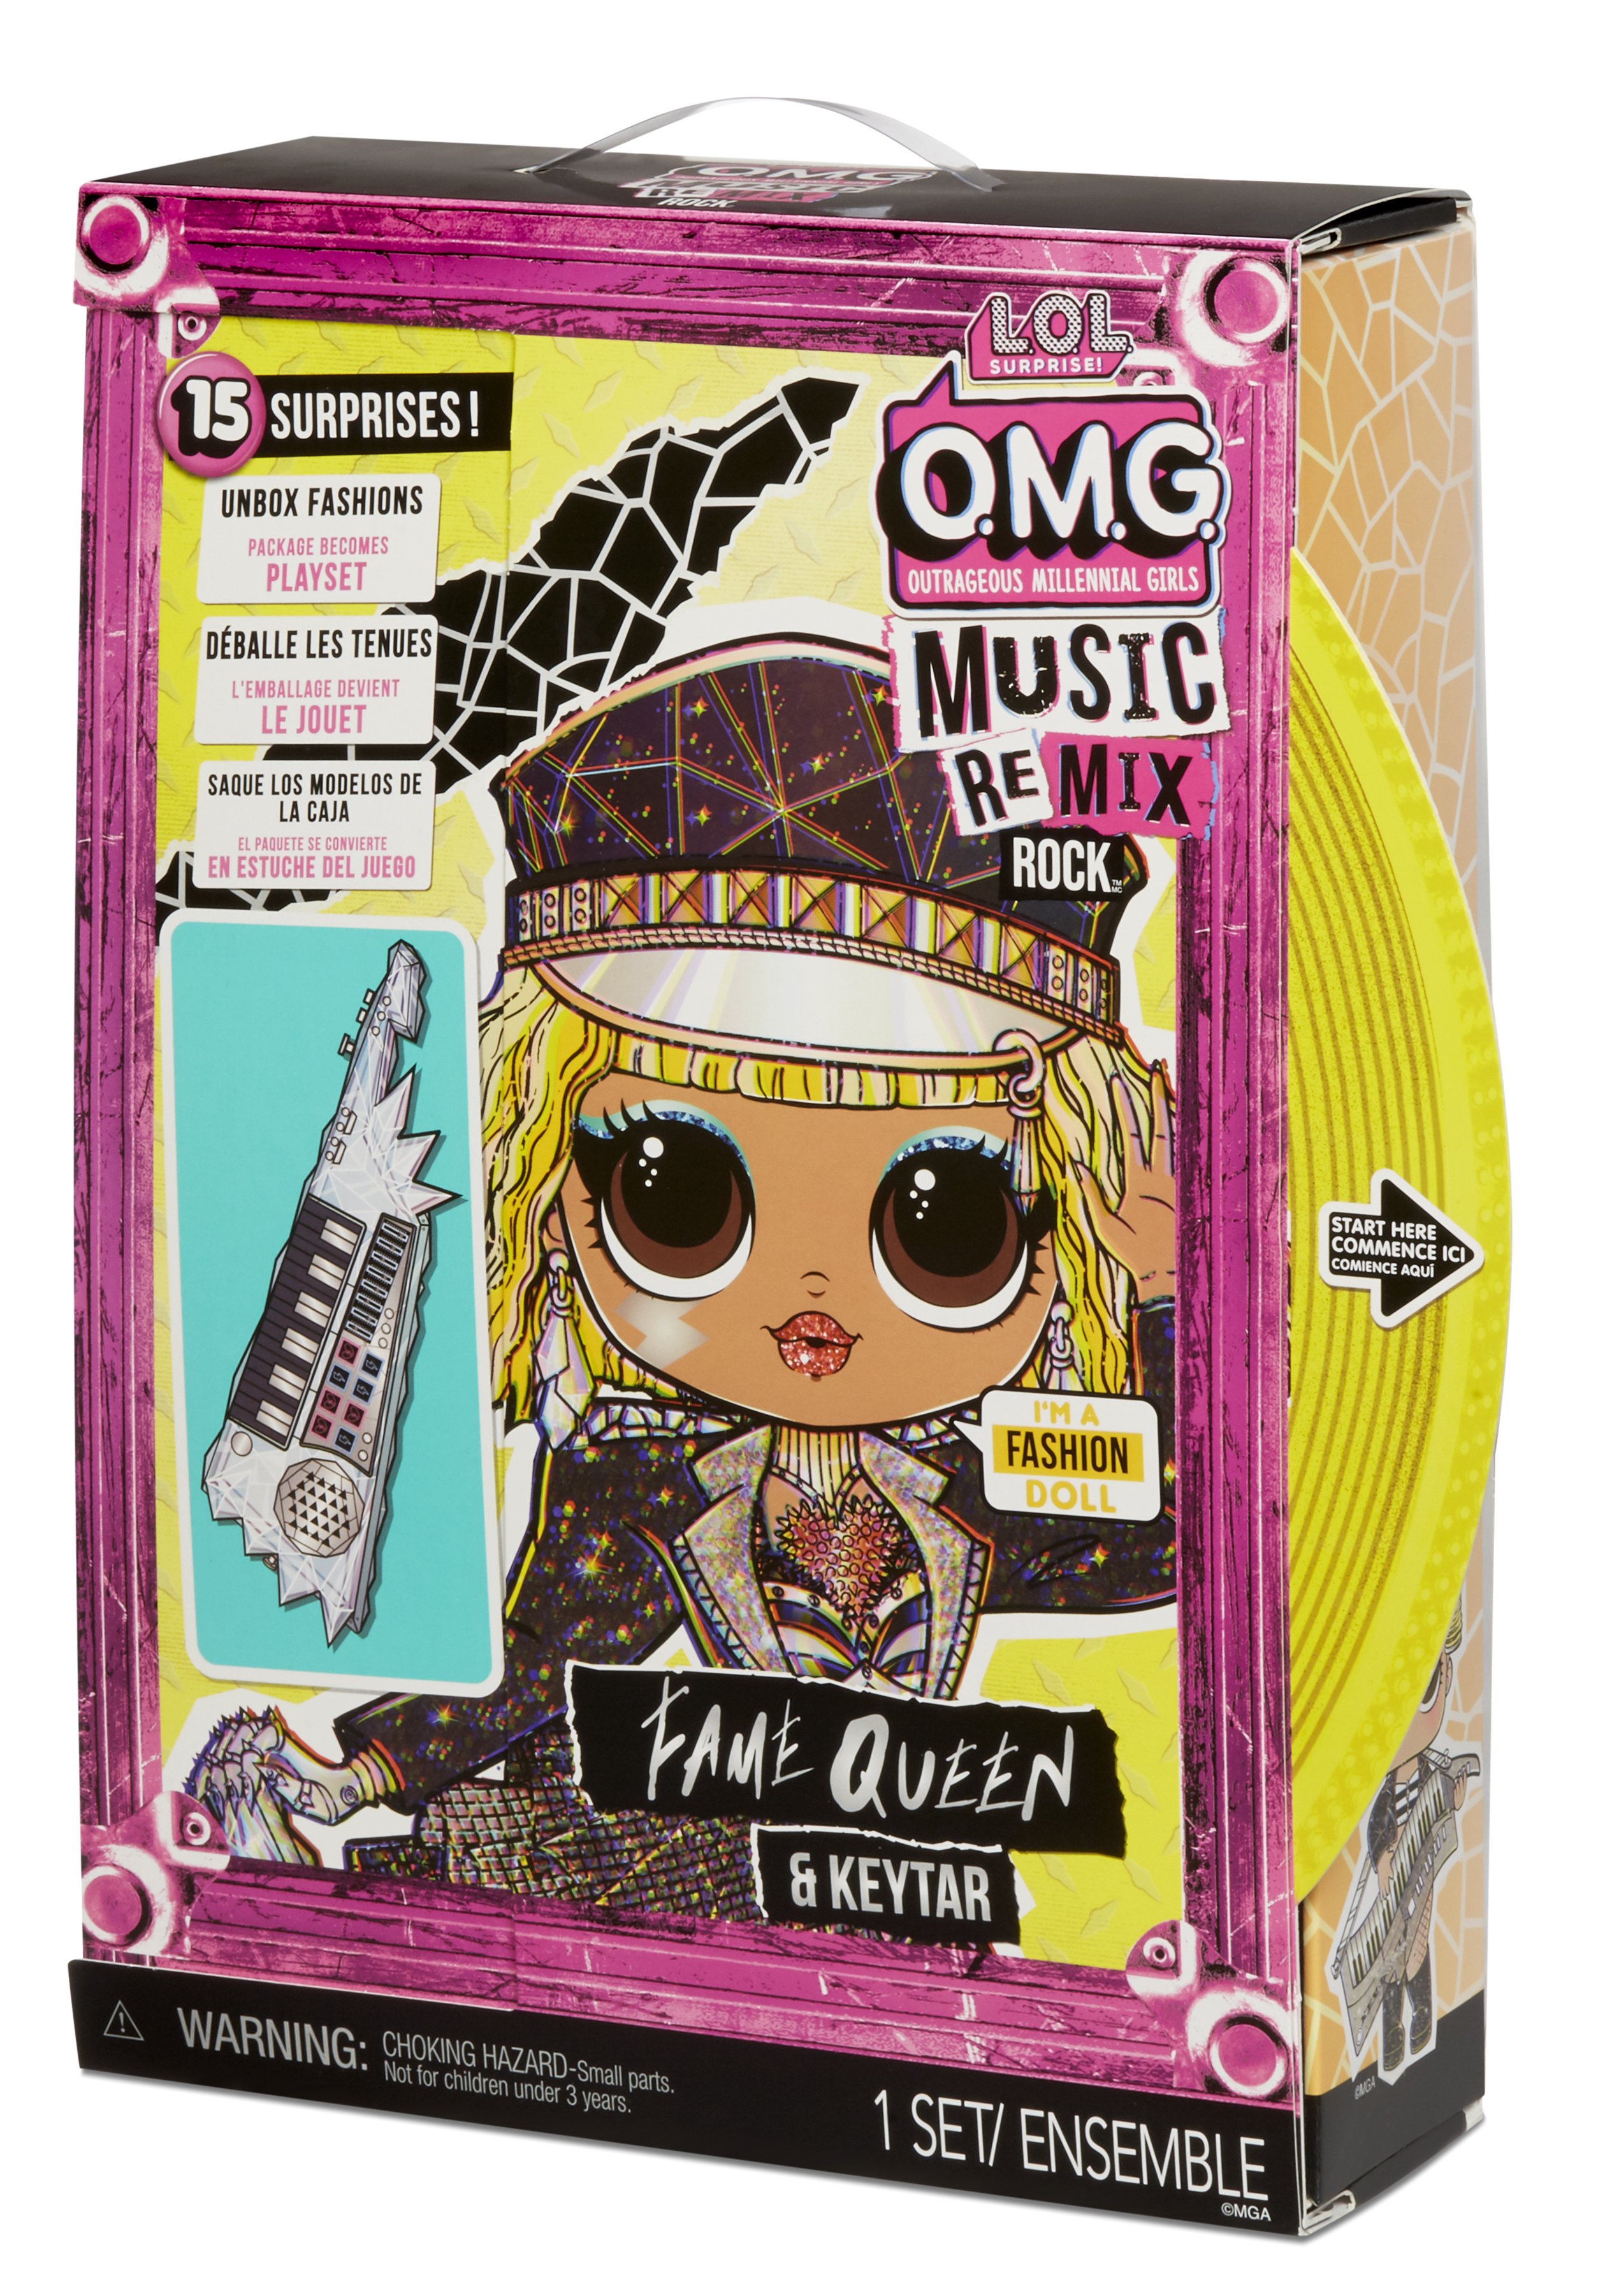 L.O.L. Surprise! O.M.G. OMG Remix Rock- Fame Queen and Keytar